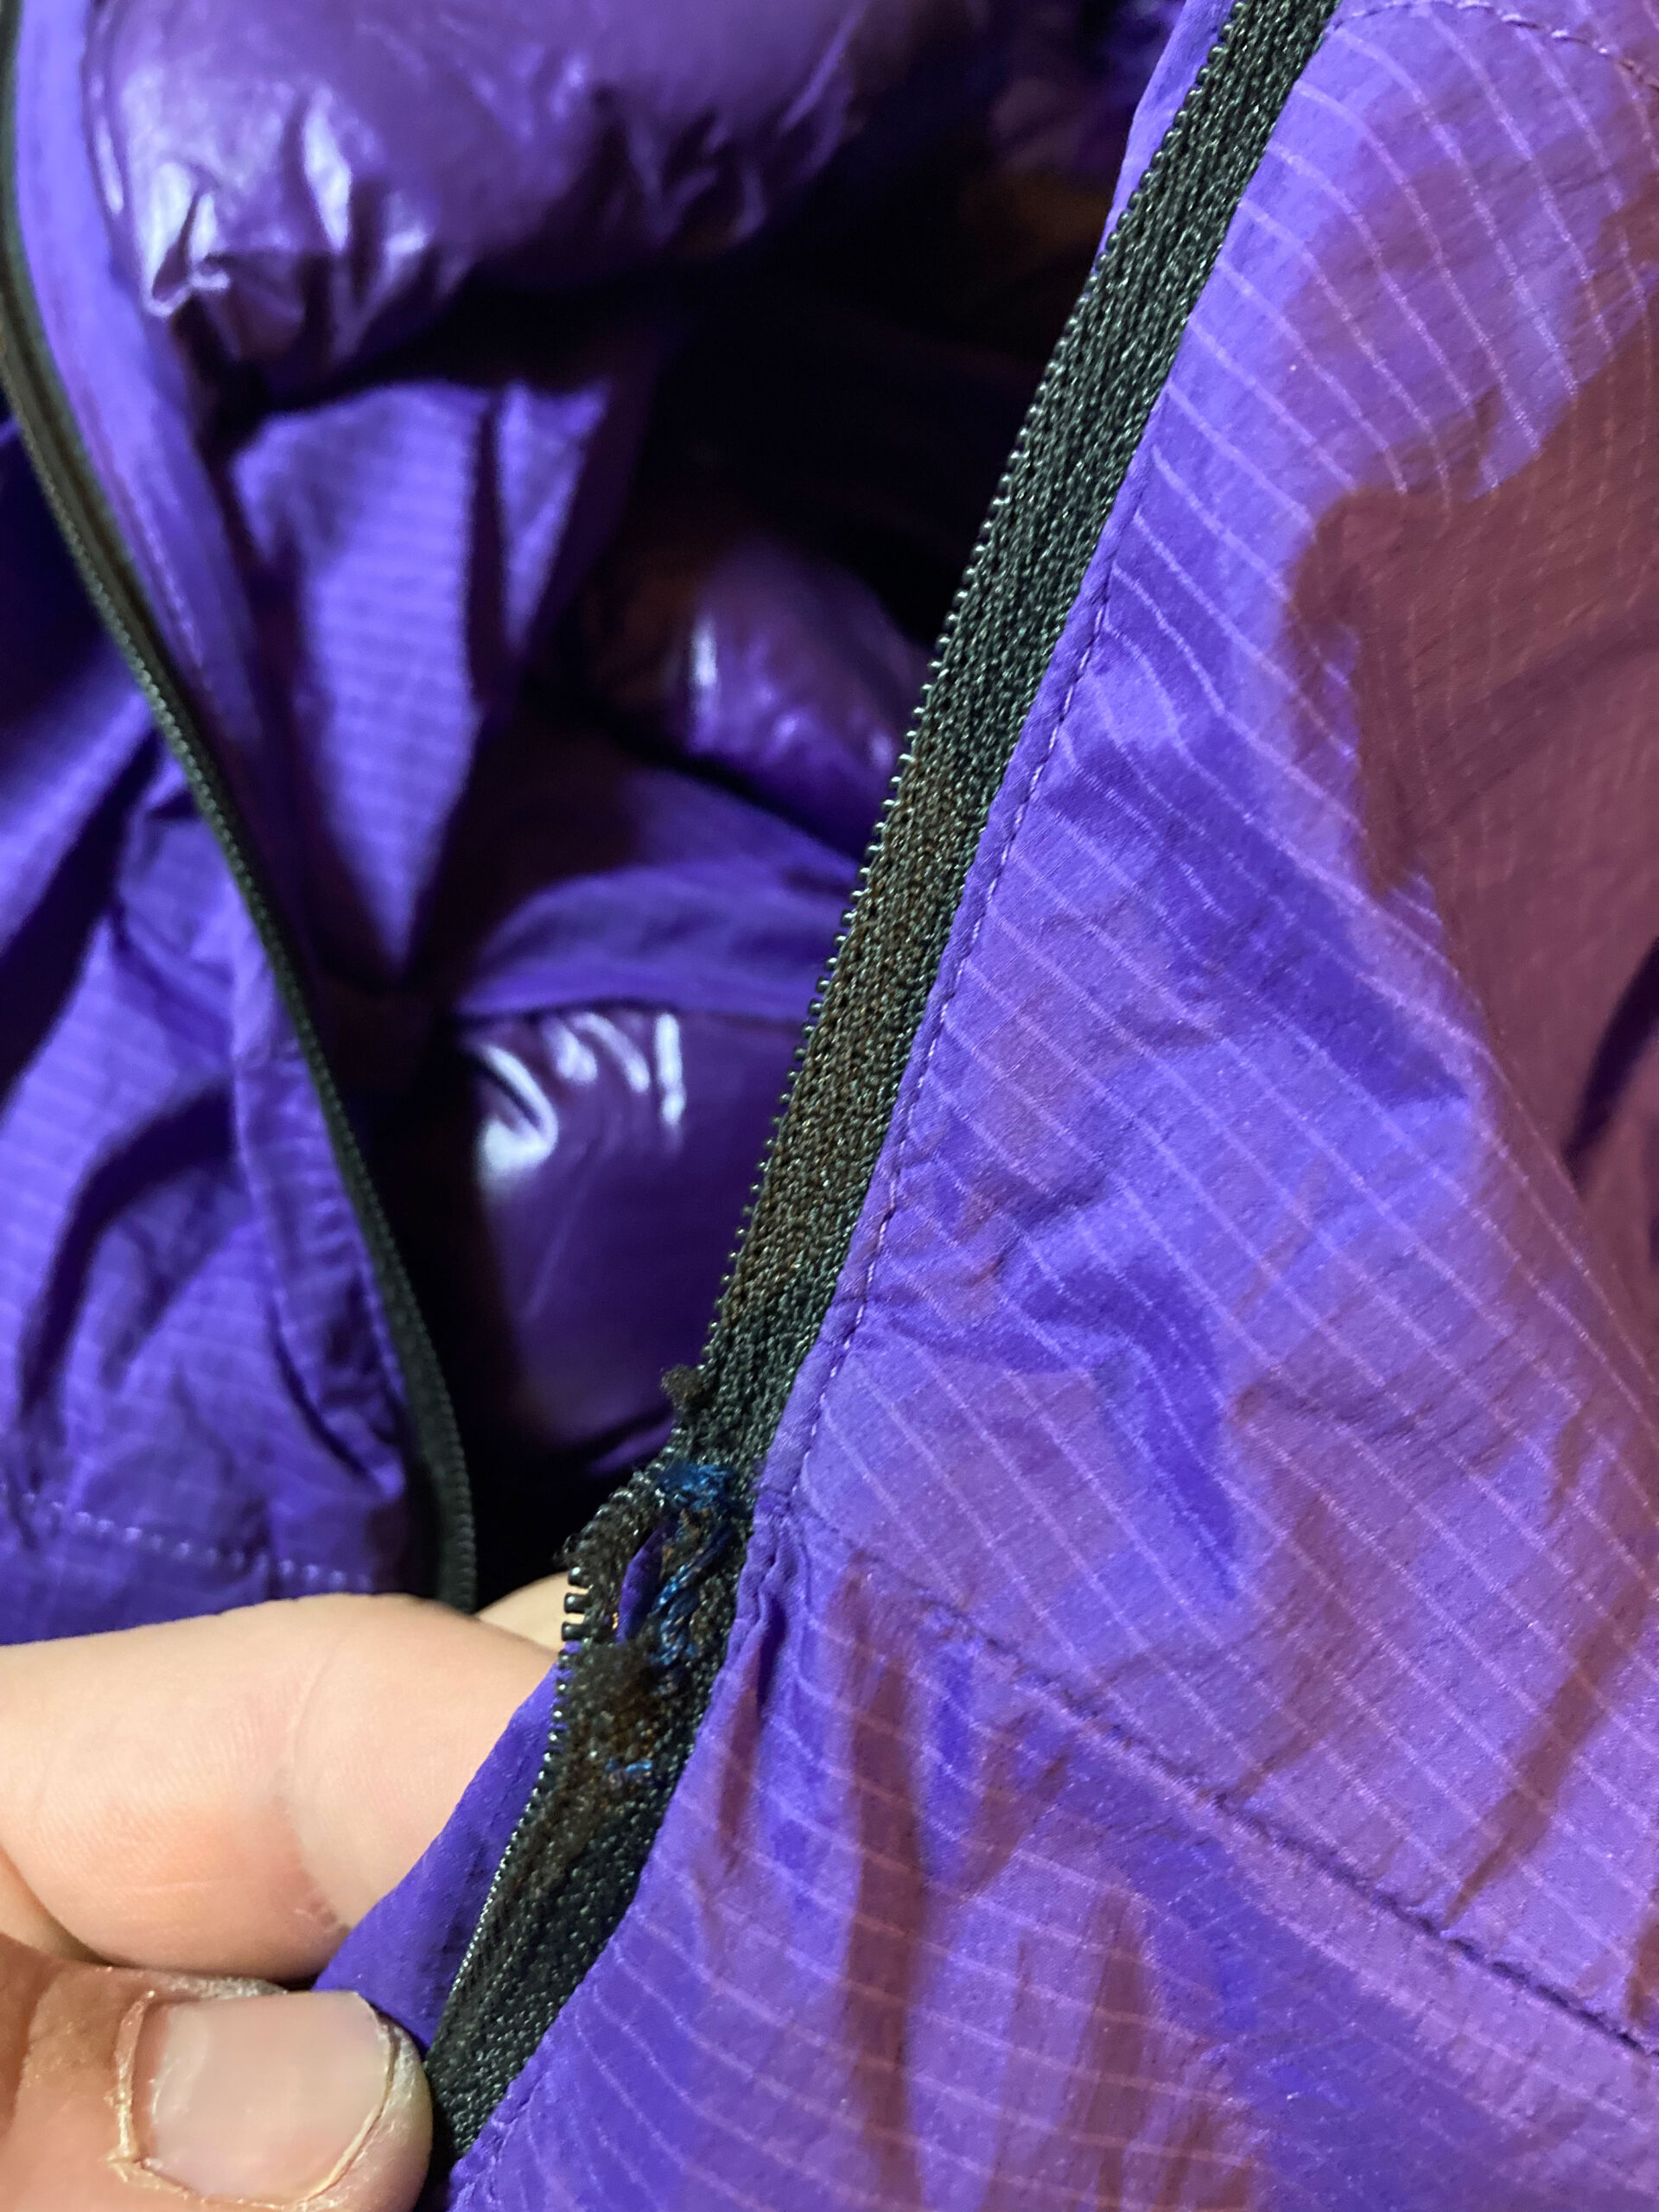 Broken Zipper On Luggage Replacement - iFixit Repair Guide